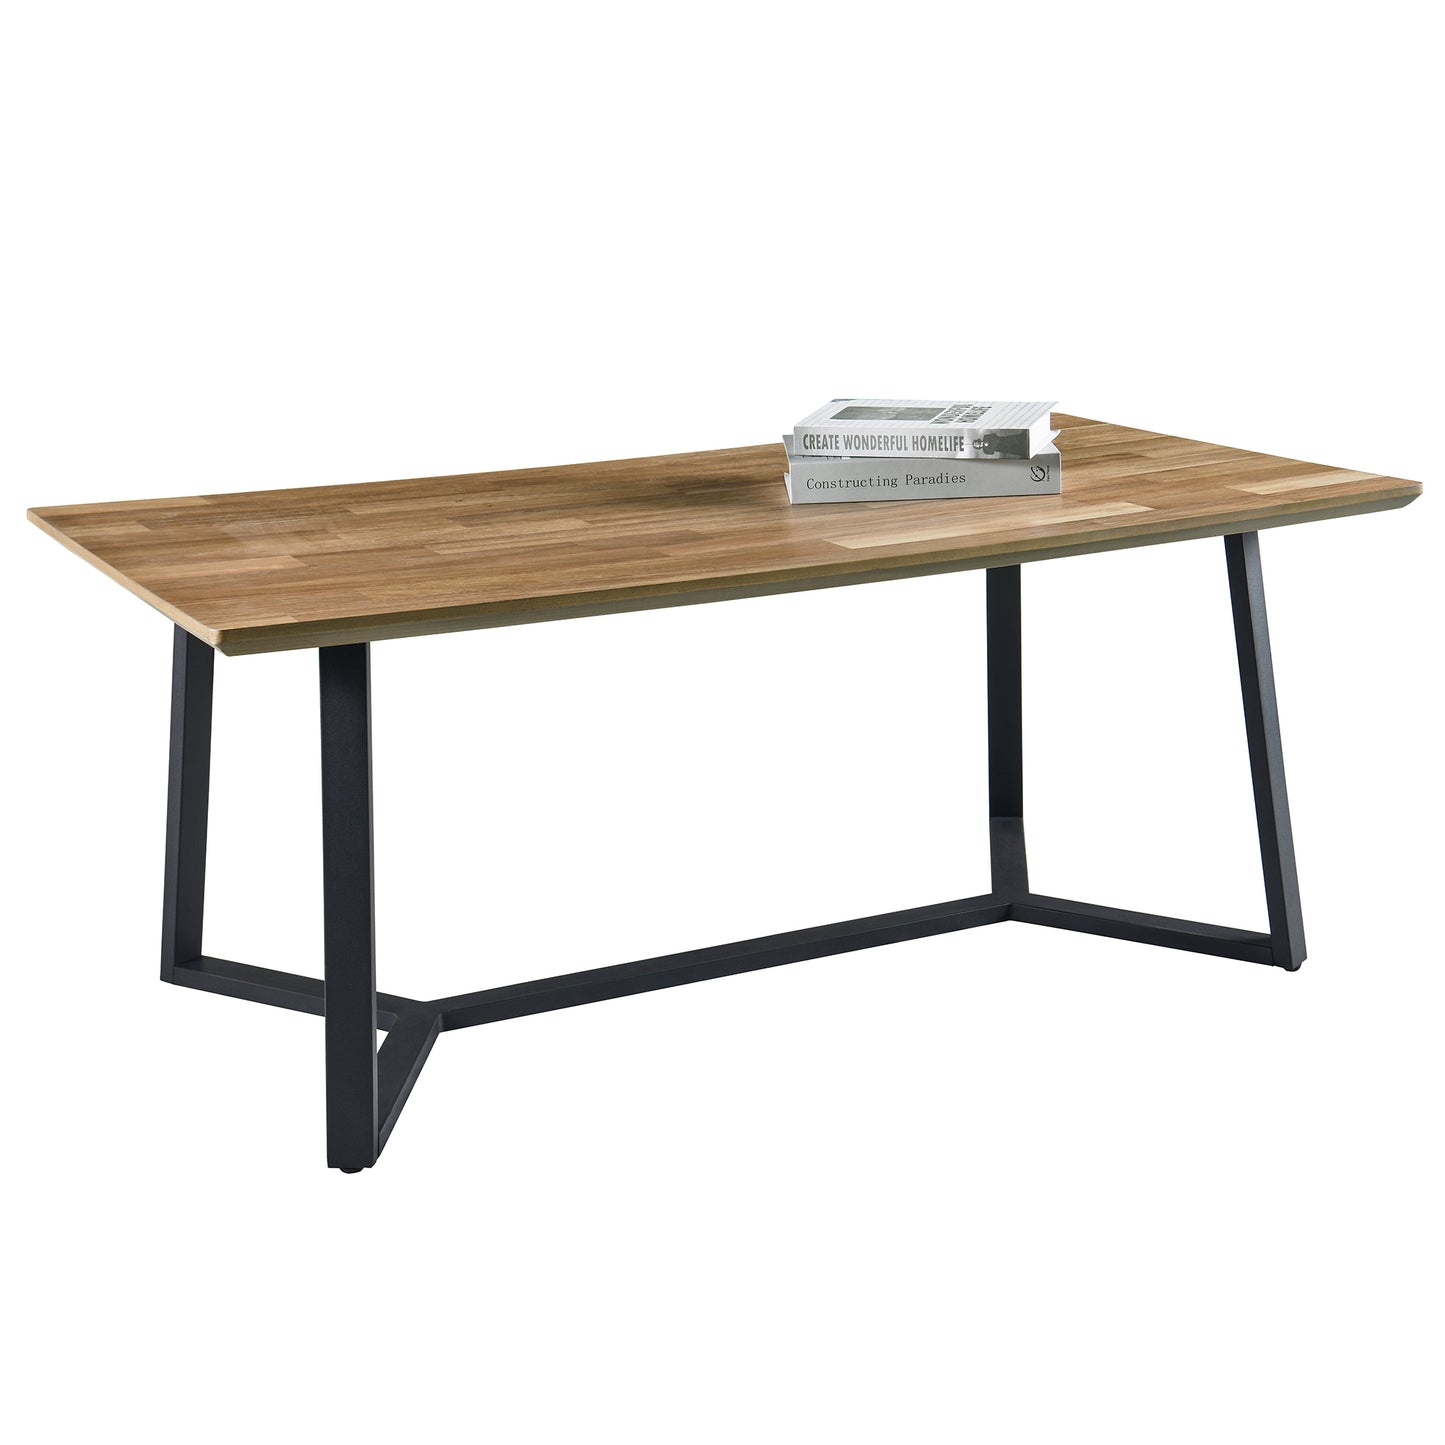 Contemporary Metal and Wood Coffee Table for Living Space